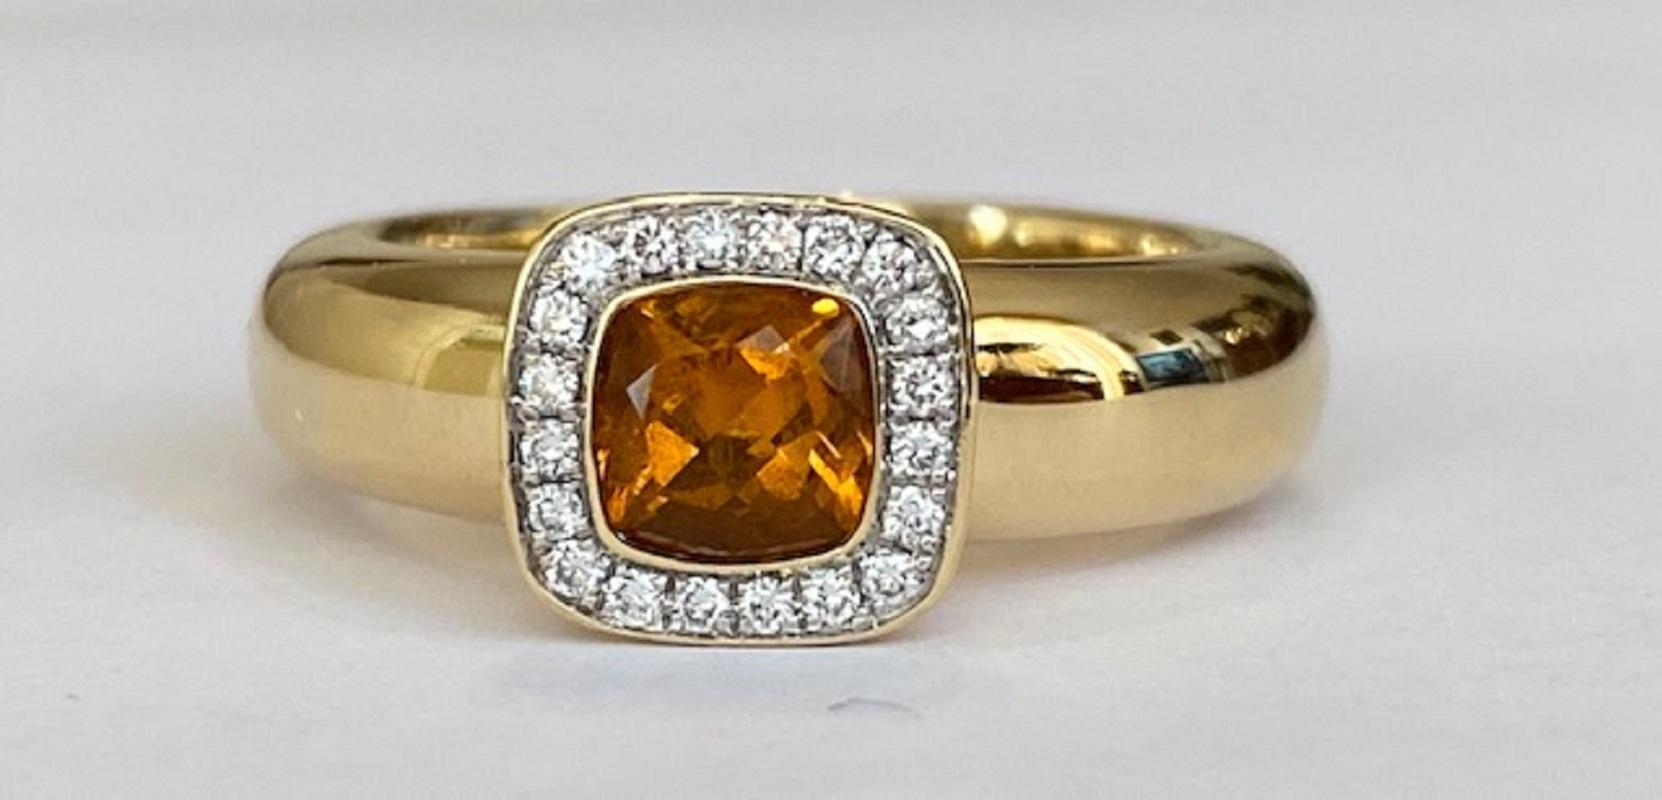 Offered in excellent condition, a Tirisi Milano Tre ring made of 18 kt yellow gold with a citrine of approx. 0.20 ct and 20 brilliant cut diamonds approx. 0.20 ct. Model: Tirisi R9162. The Milano family by Tirisi is one of the permanent collections